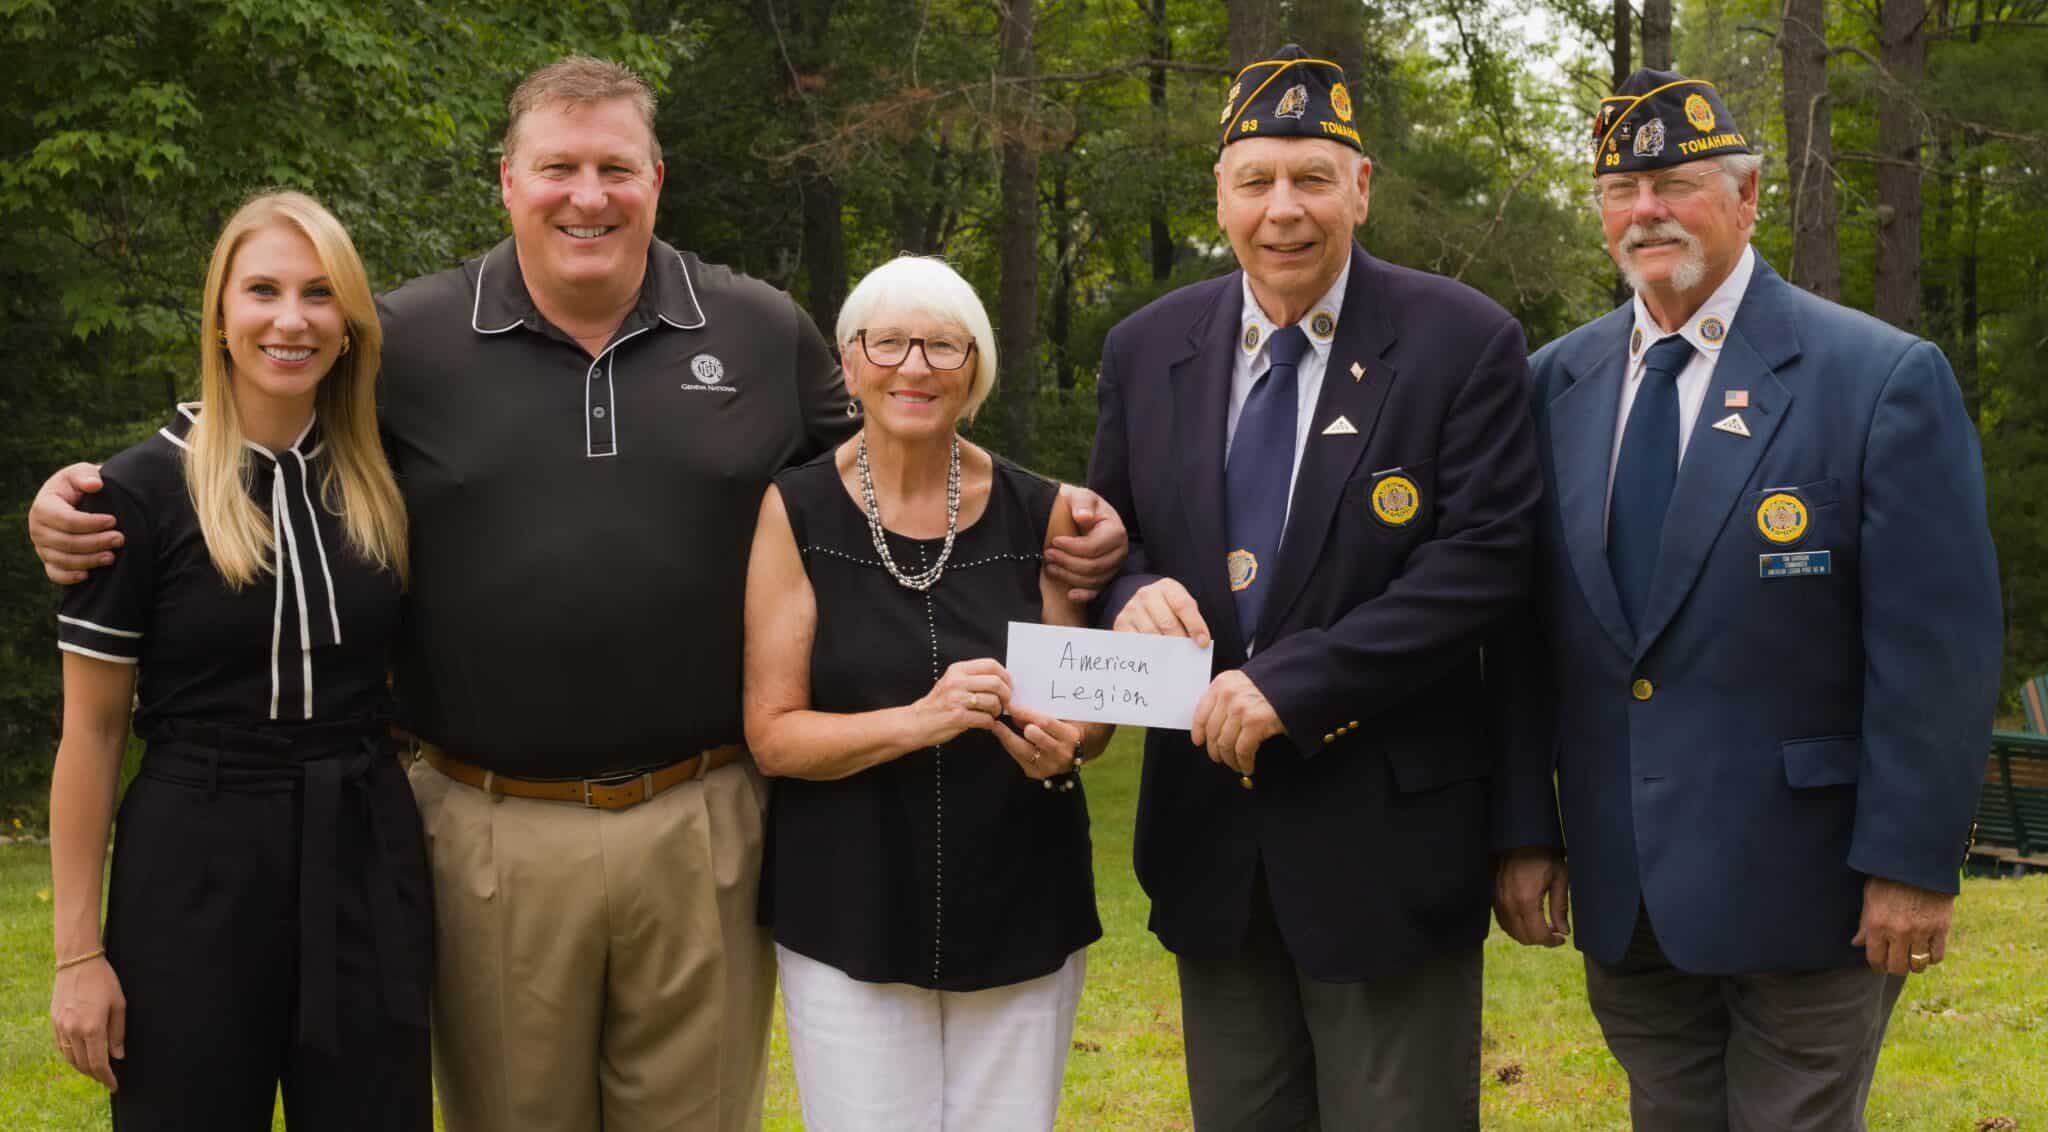 Laabs Family Fund donates $10,000.00 to American Legion Post 93 as renovations reach halfway mark